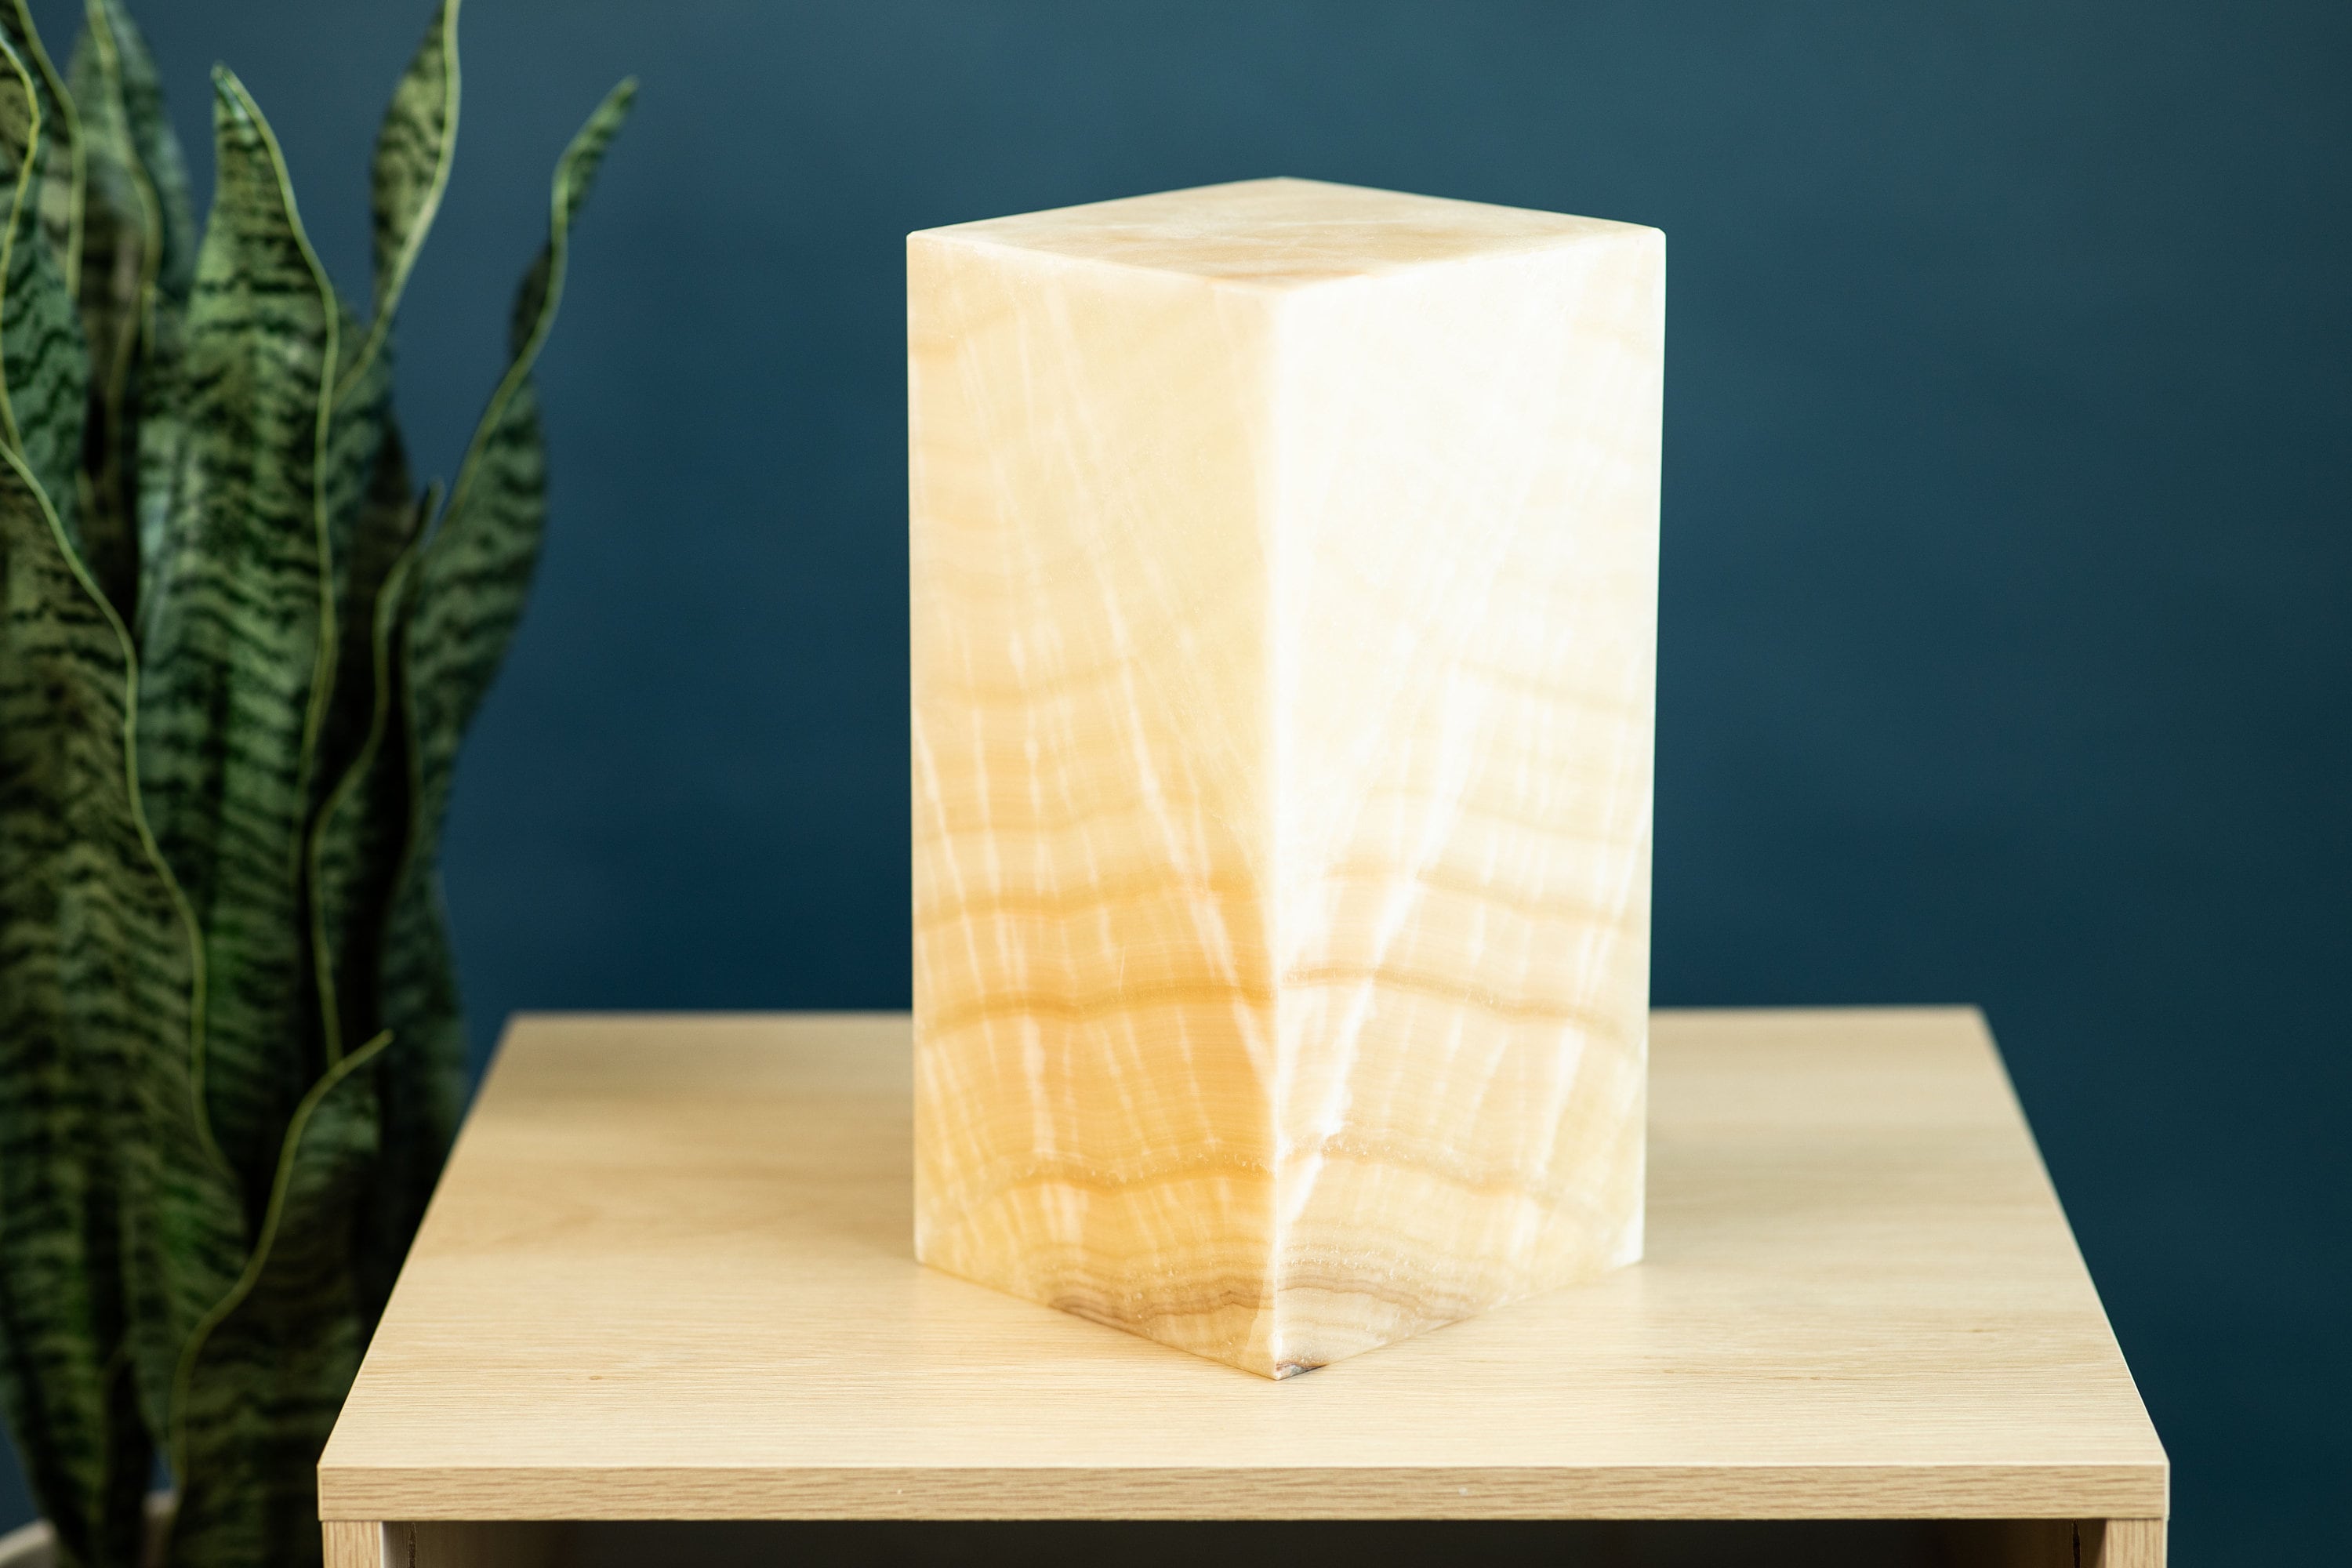 Creamy White Table Lamp - 12 Inch Tall Desk lamp - Mood Lamp - Designed and Crafted by Stone Fusion